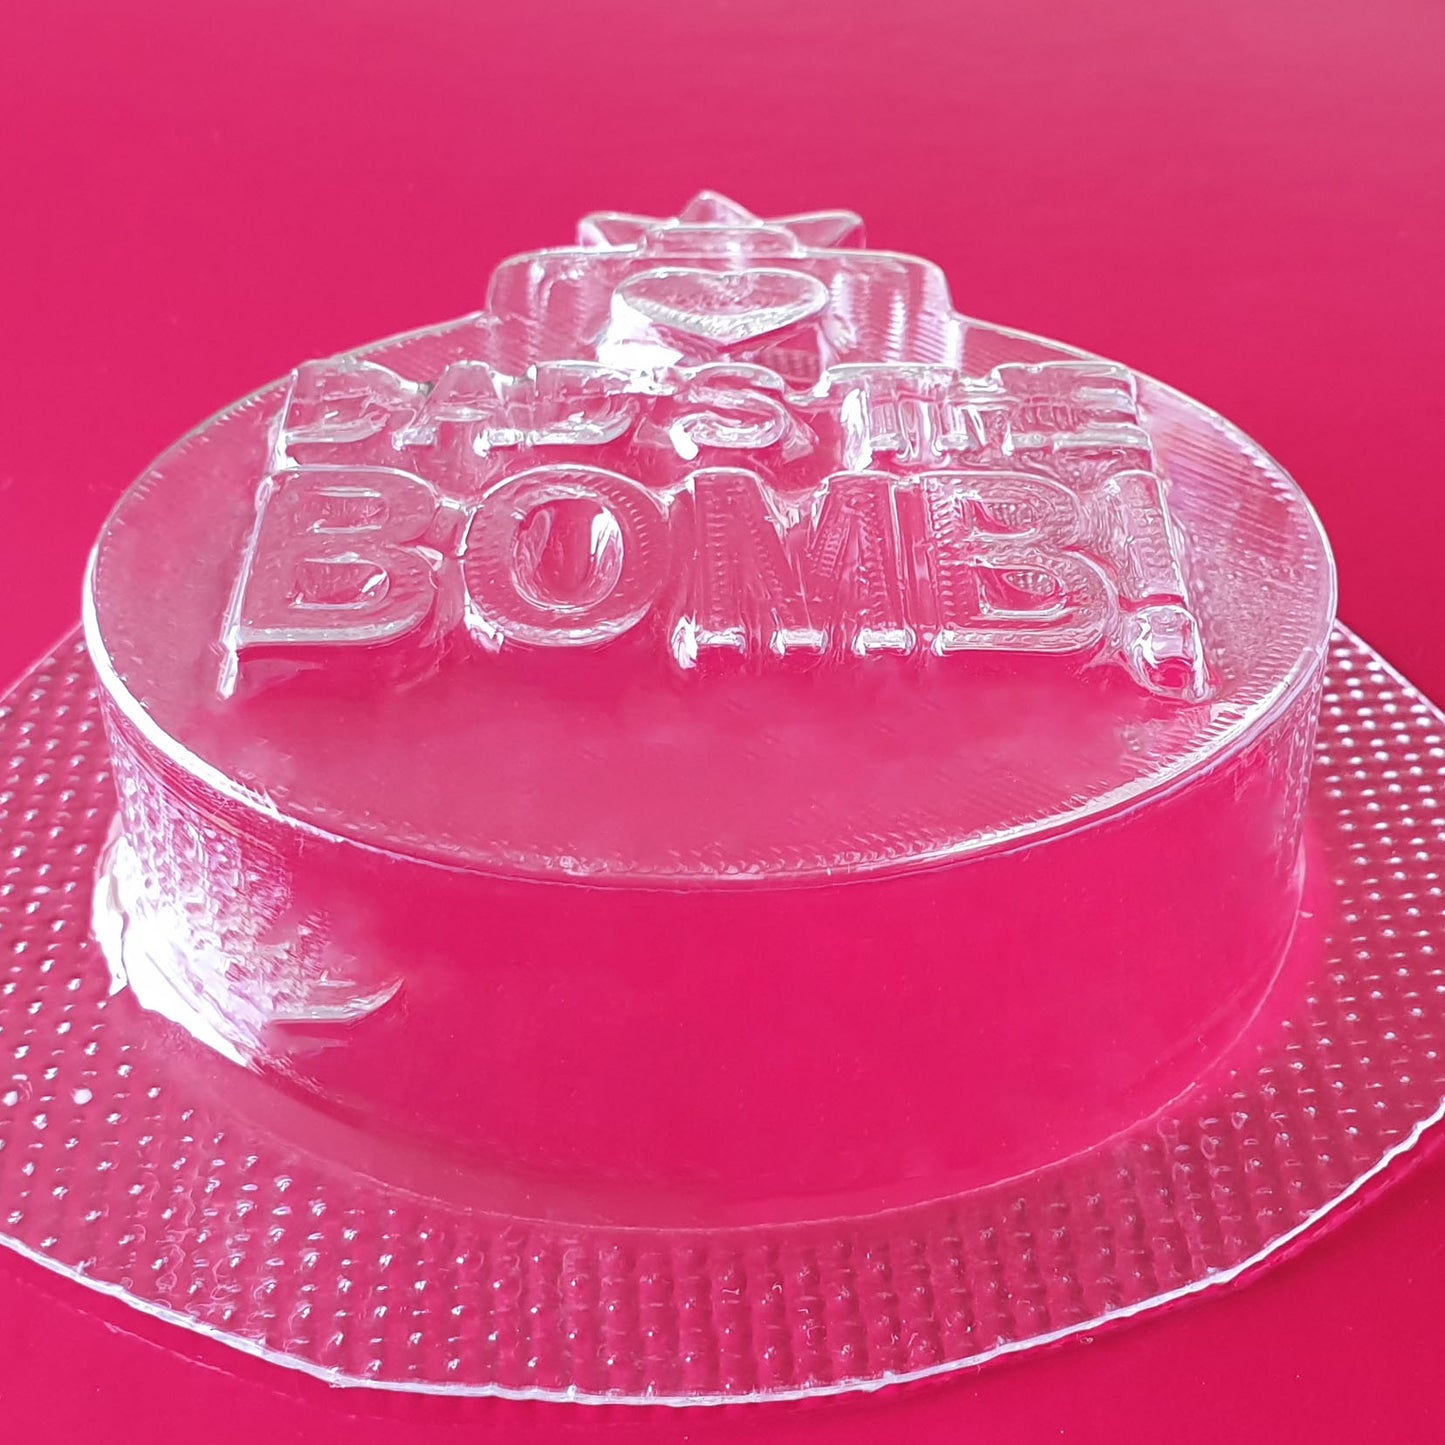 Dads The Bomb Bath Bomb Mould by Truly Personal